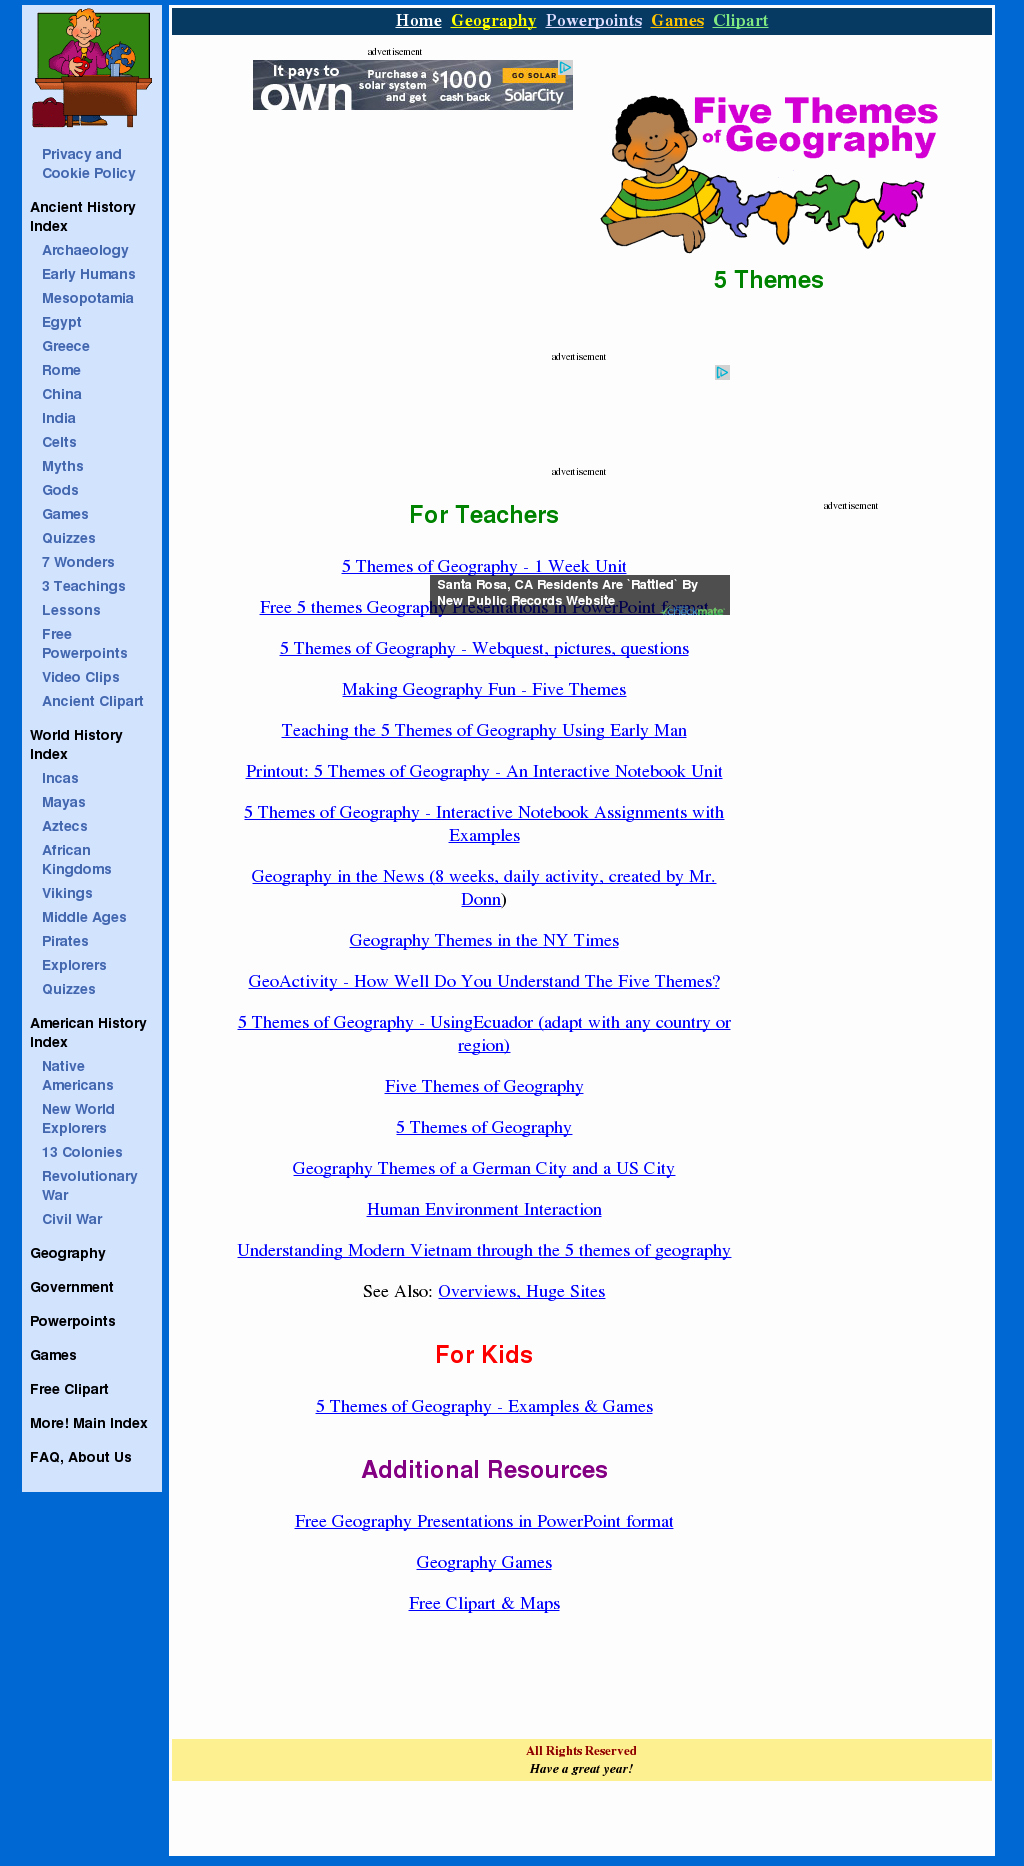 5 themes Of Geography Worksheet Fresh 5 themes Of Geography Lesson Plans &amp; Worksheets Reviewed